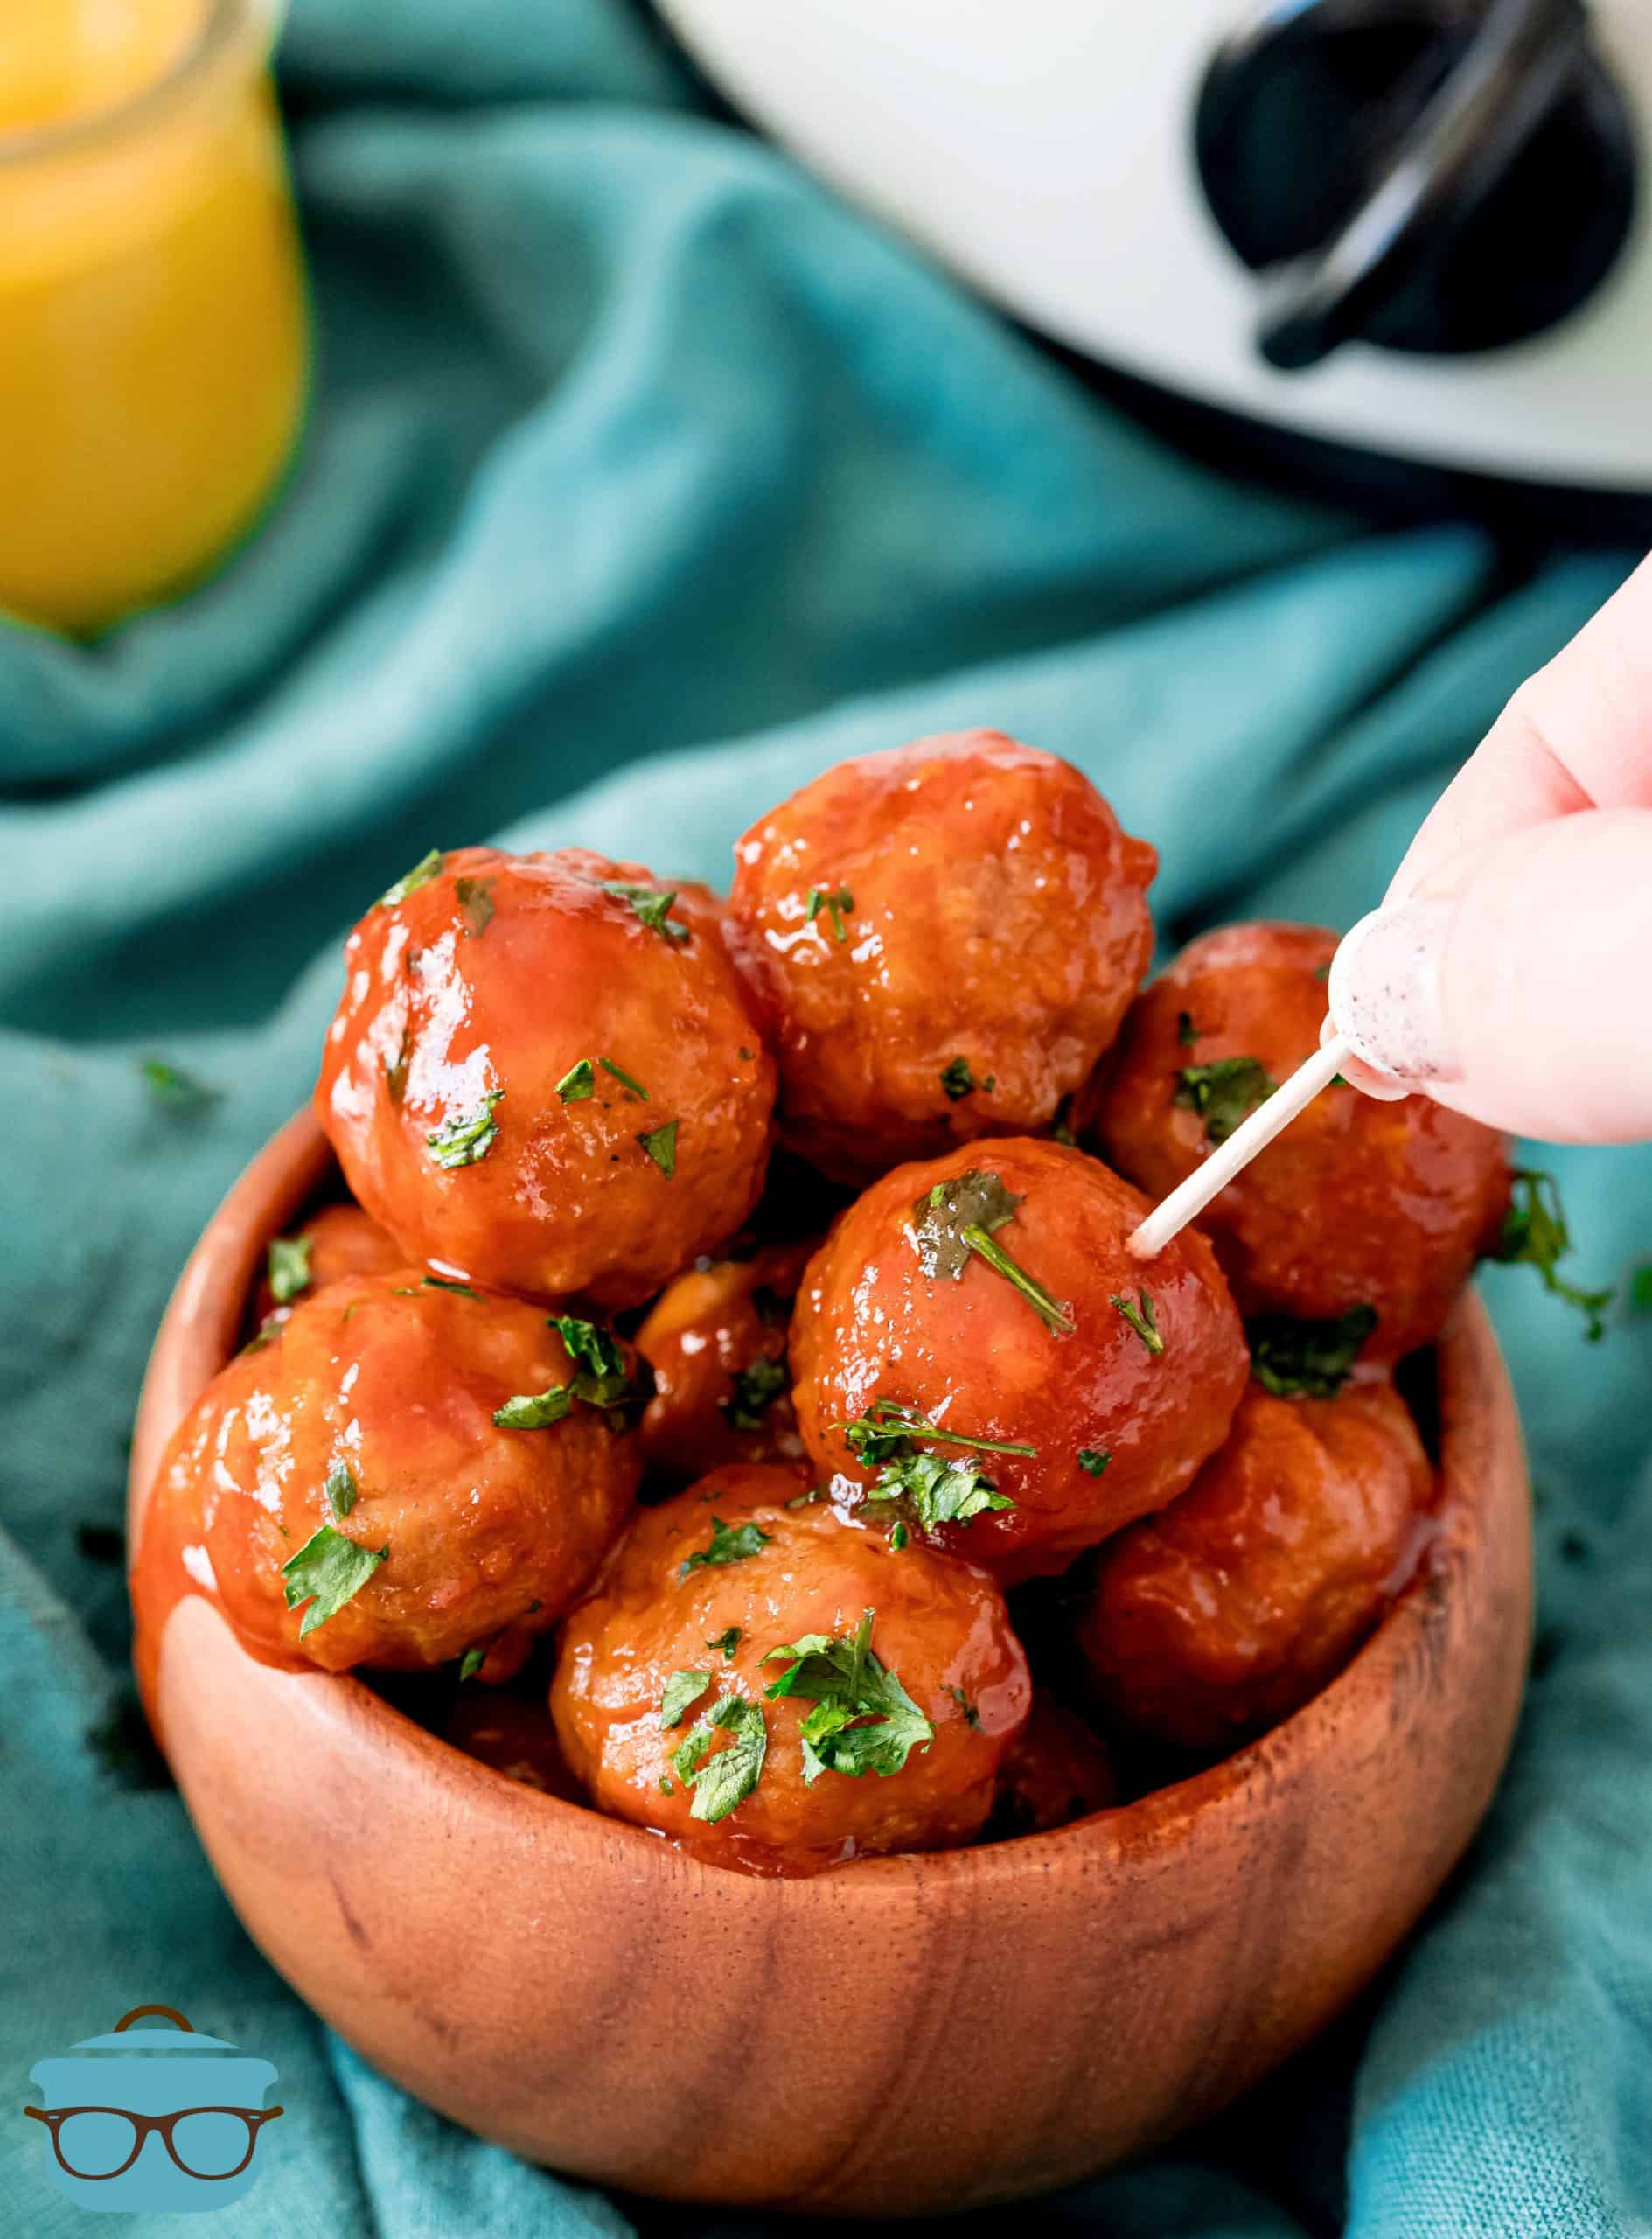 Crock Pot Meatballs in bowl with hand poking one meatball with toothpick